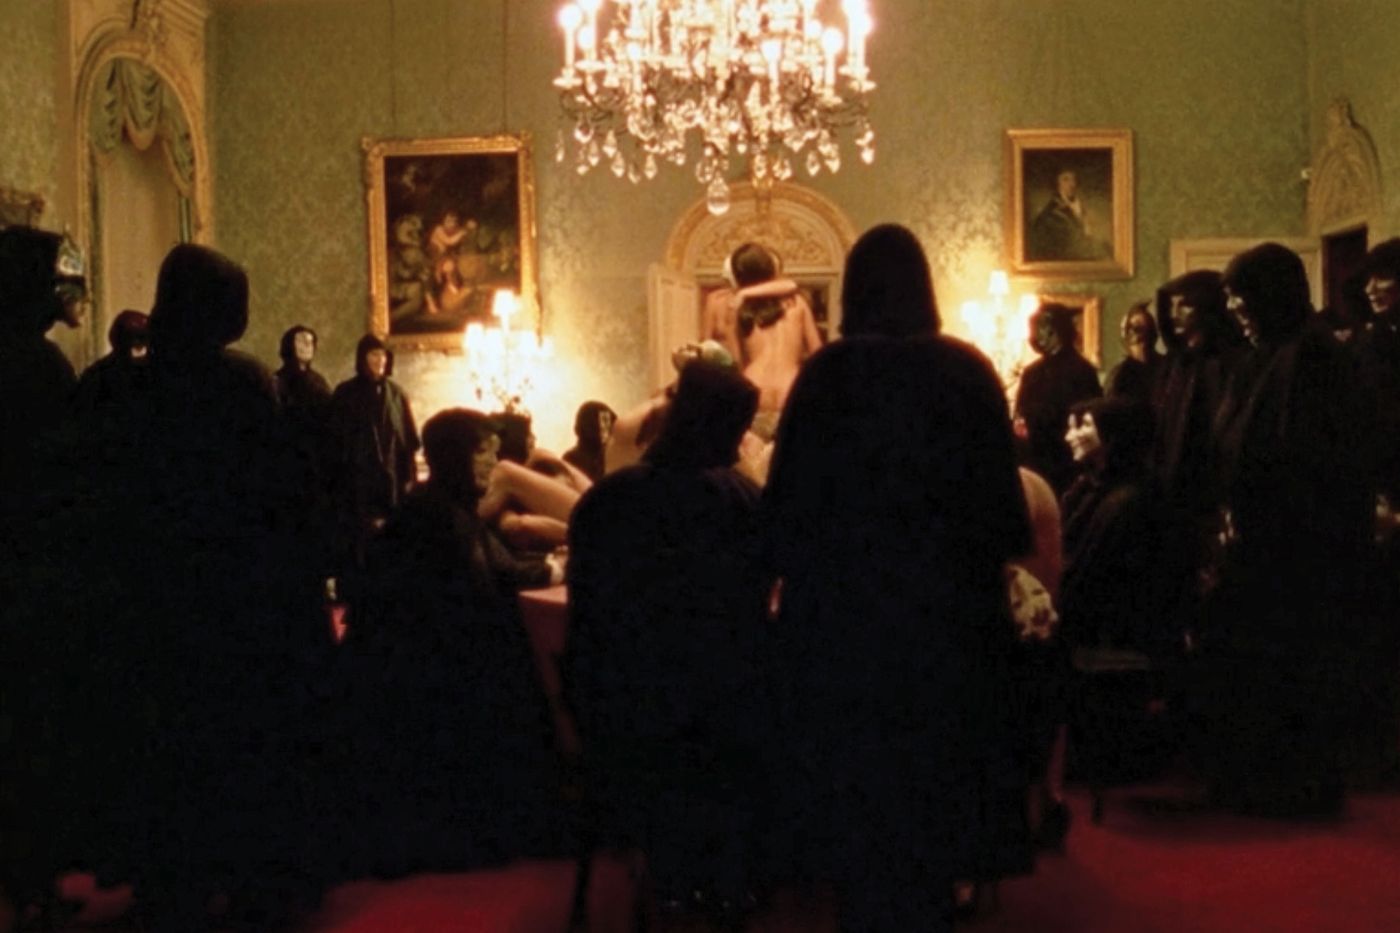 Movie The Watch Orgy Scene - Oral History: The 'Eyes Wide Shut' Orgy Scene